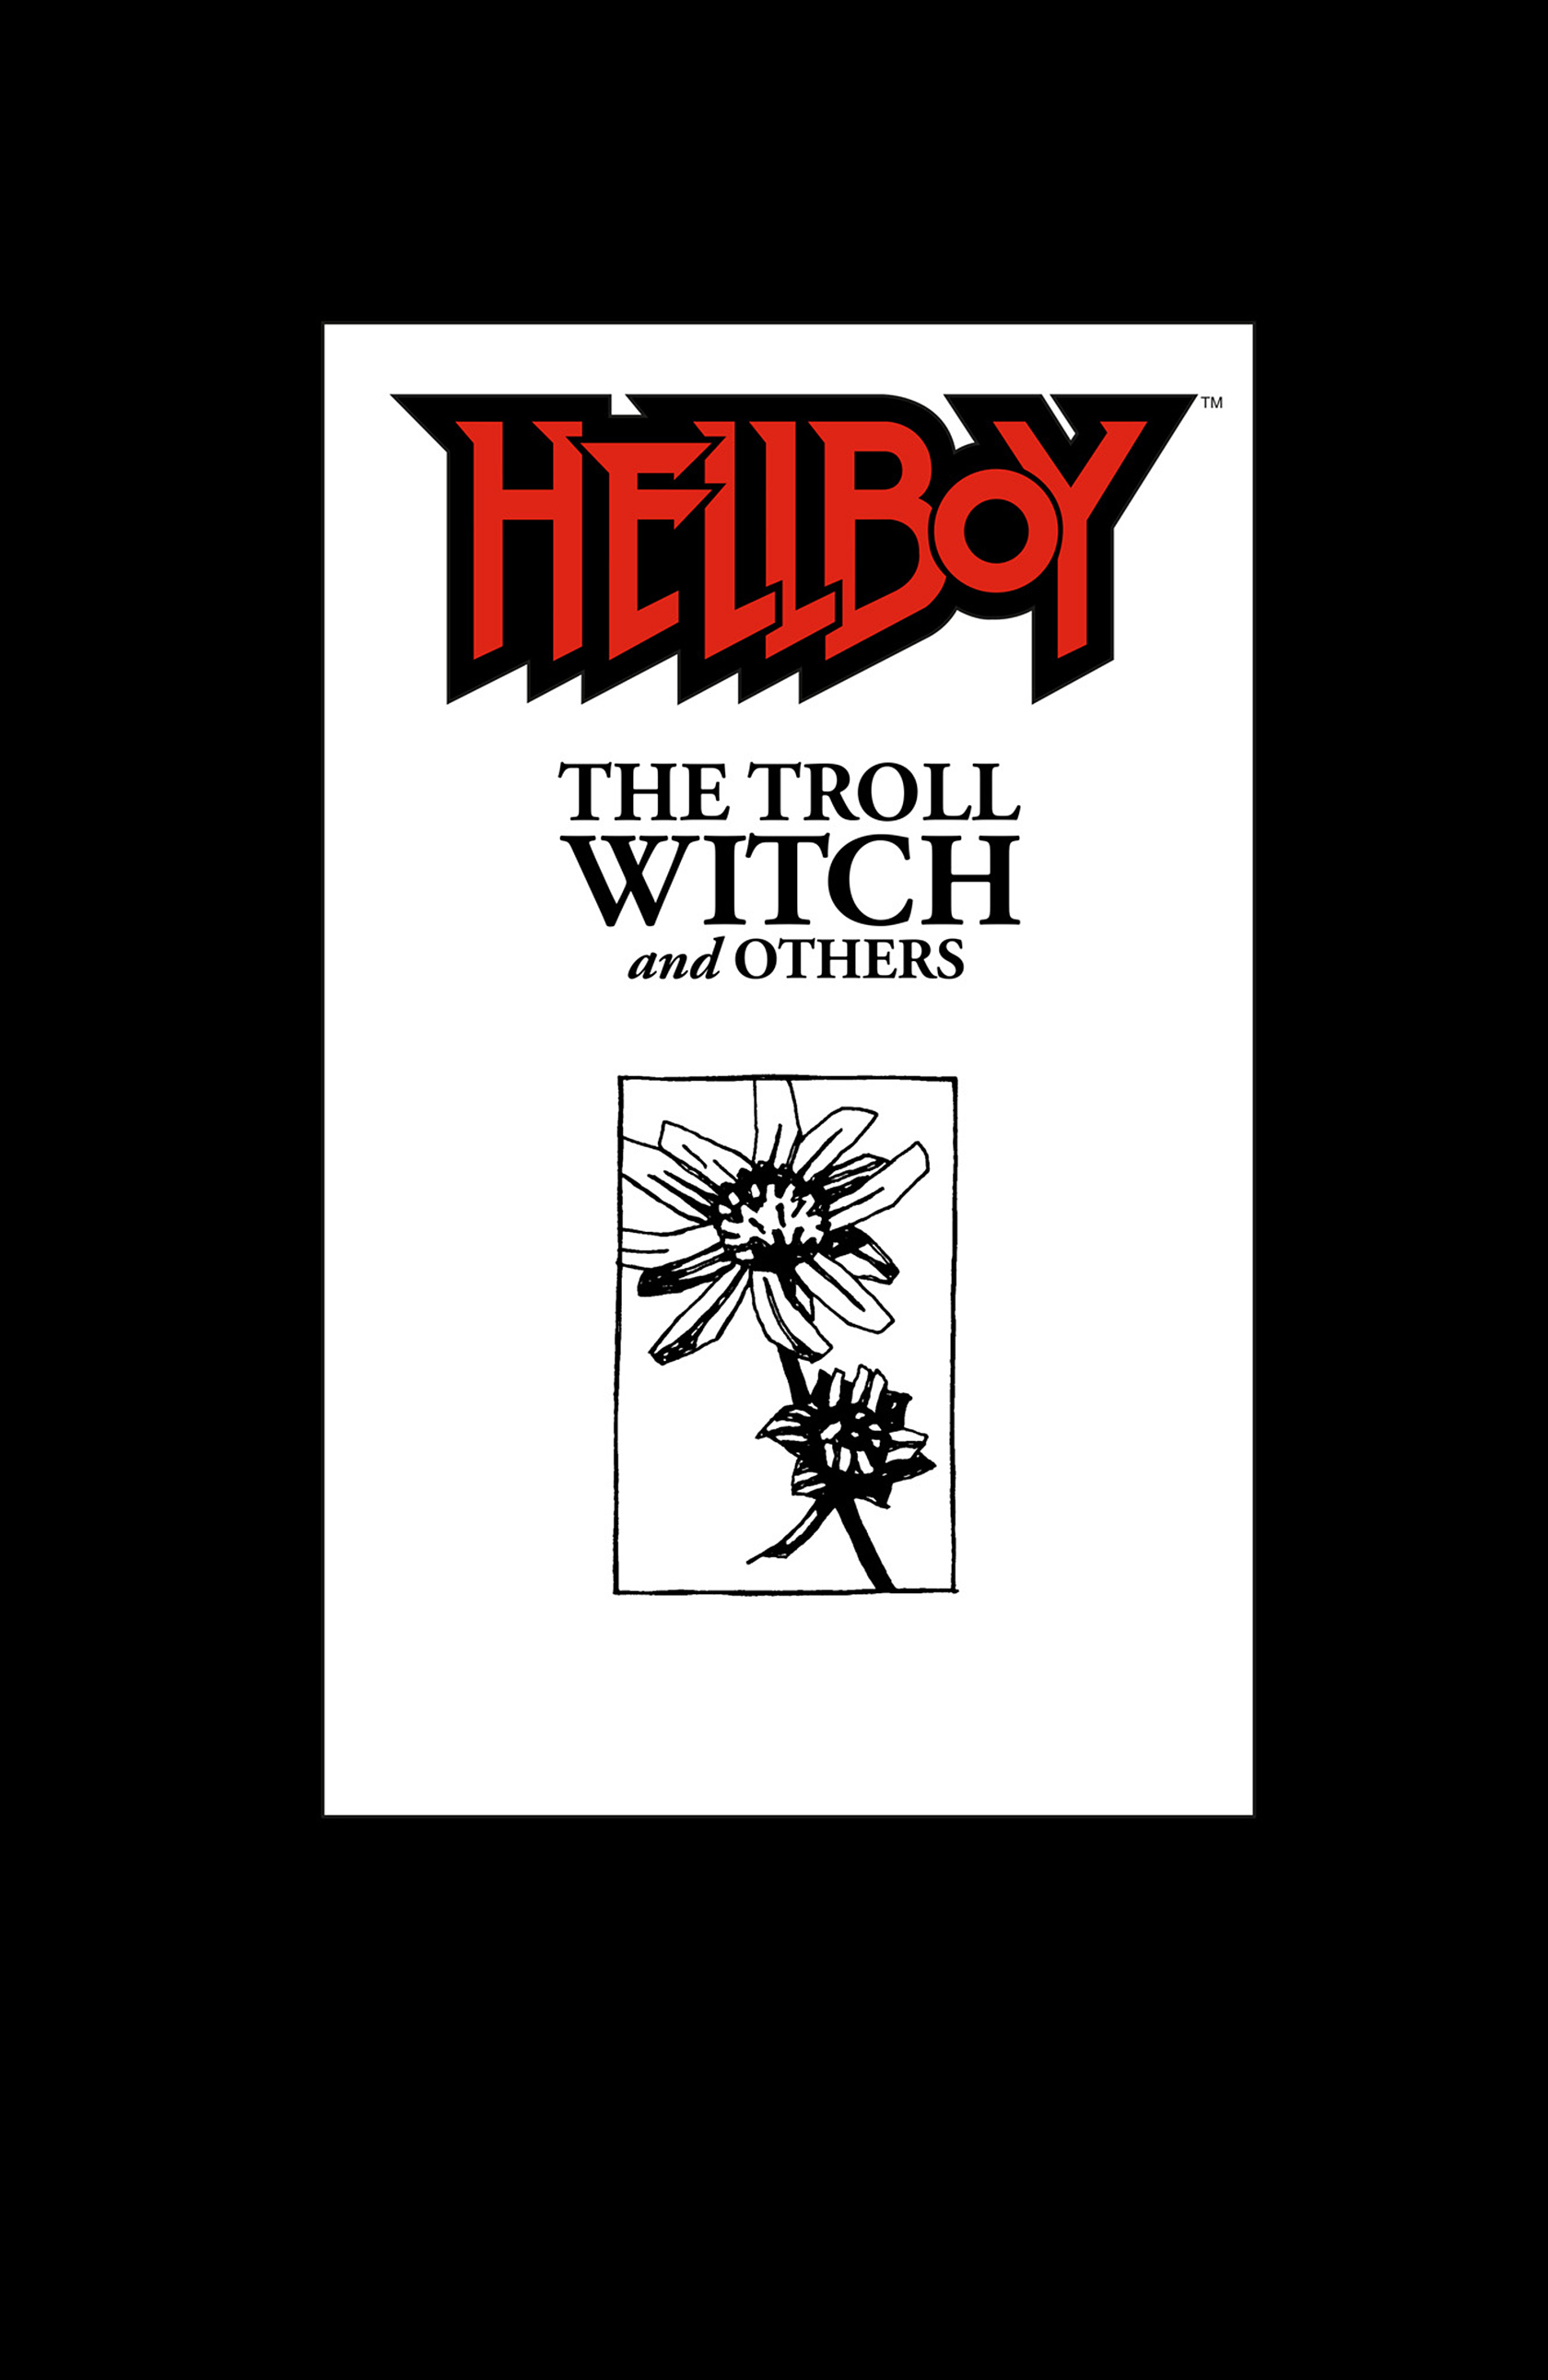 Read online Hellboy: The Troll Witch and Others comic -  Issue # TPB - 2